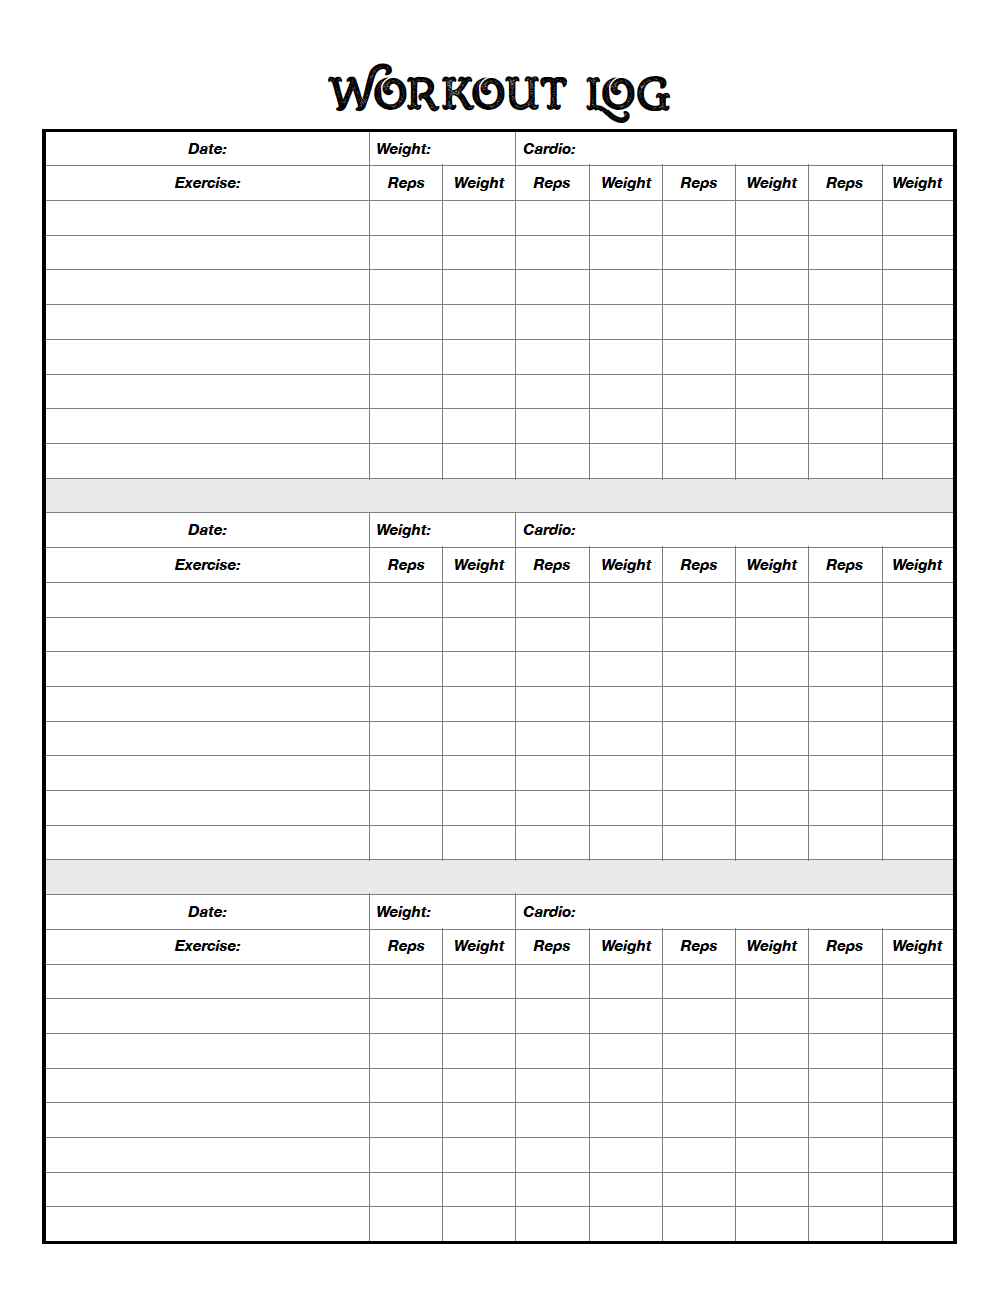 Free Printable Workout Logs: 3 Designs For Your Needs - Free Printable Workout Journal